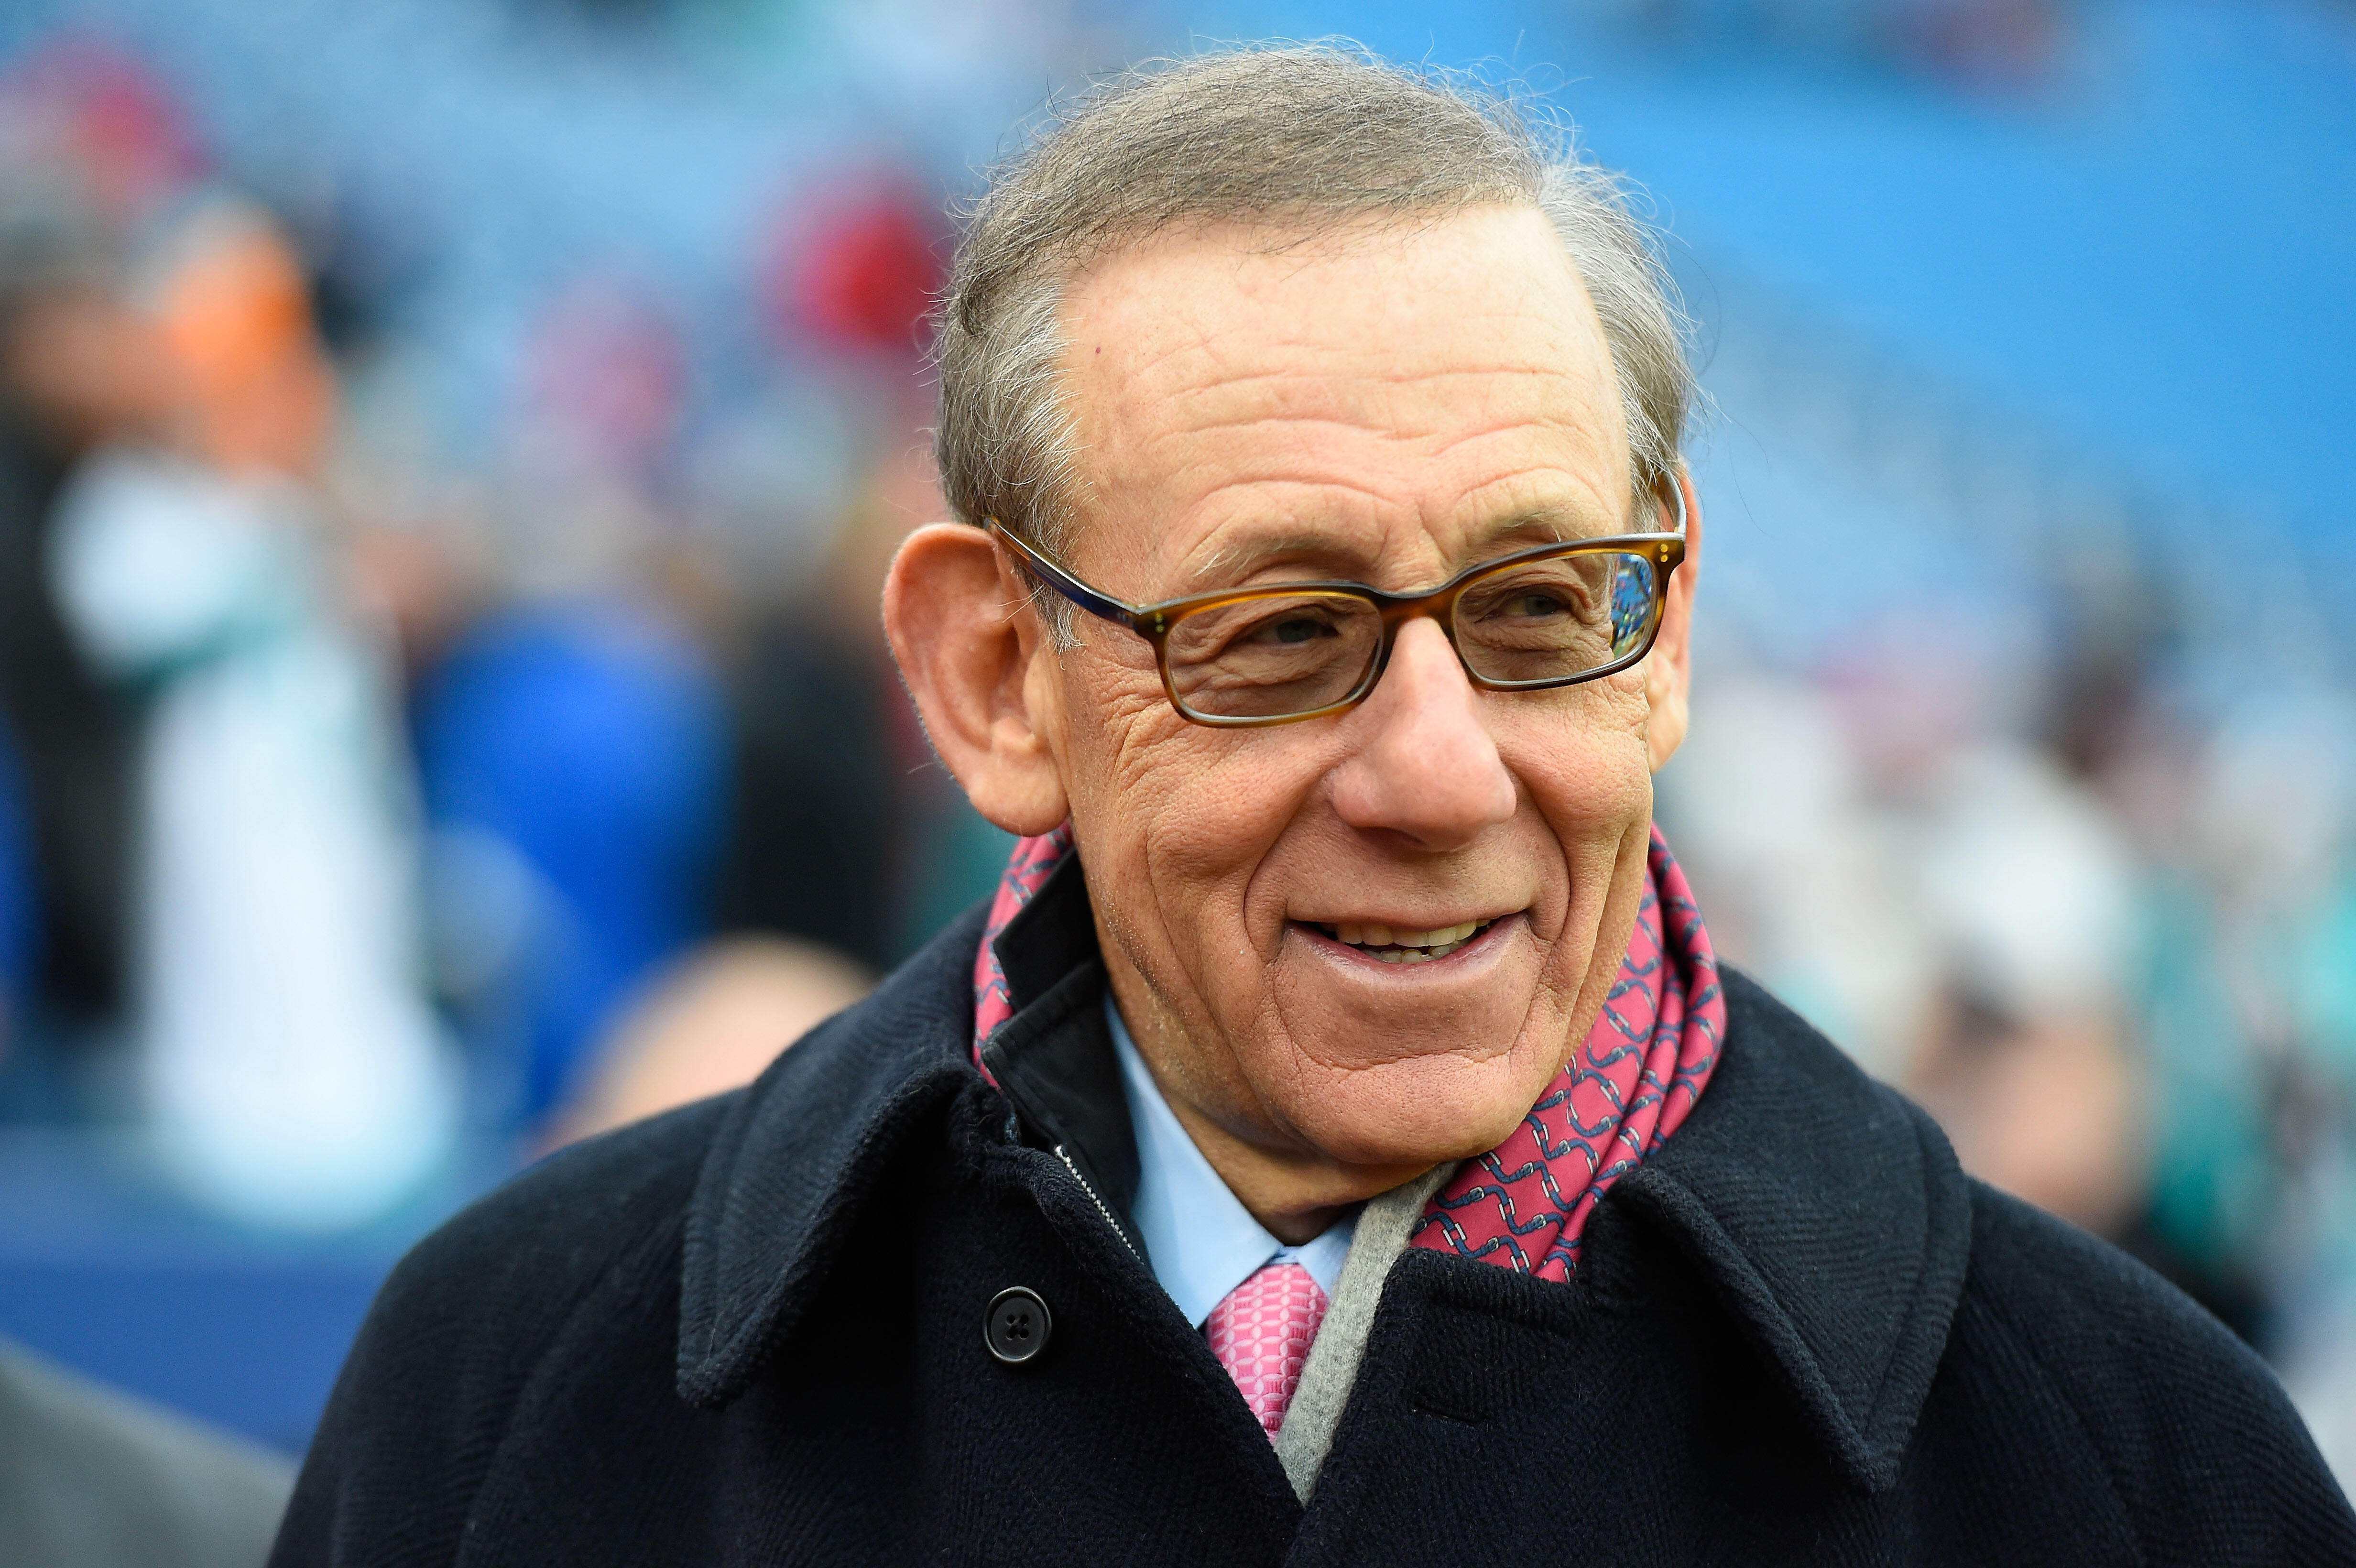 ORCHARD PARK, NY - DECEMBER 24:  Owner of the Miami Dolphins Stephen M. Ross watches his team warm up before the game against the Buffalo Bills at New Era Stadium on December 24, 2016 in Orchard Park, New York.  (Photo by Rich Barnes/Getty Images)